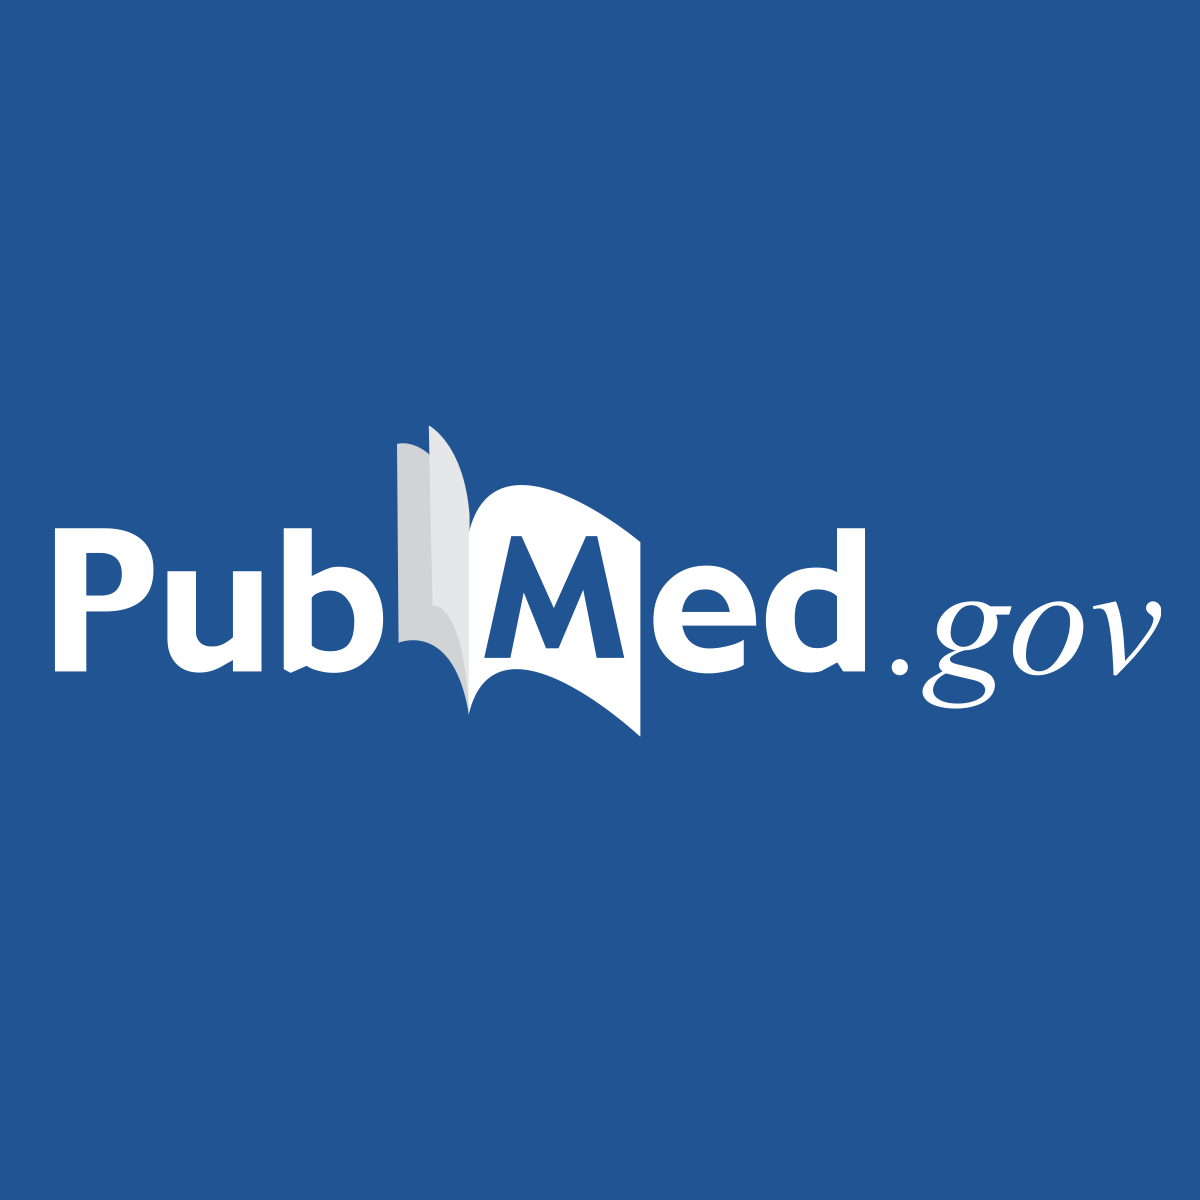 Efficacy and Safety of Cetuximab Dosing (biweekly vs weekly) in Patients with KRAS Wild-type Metastatic Colorectal Cancer: A Meta-analysis - PubMed